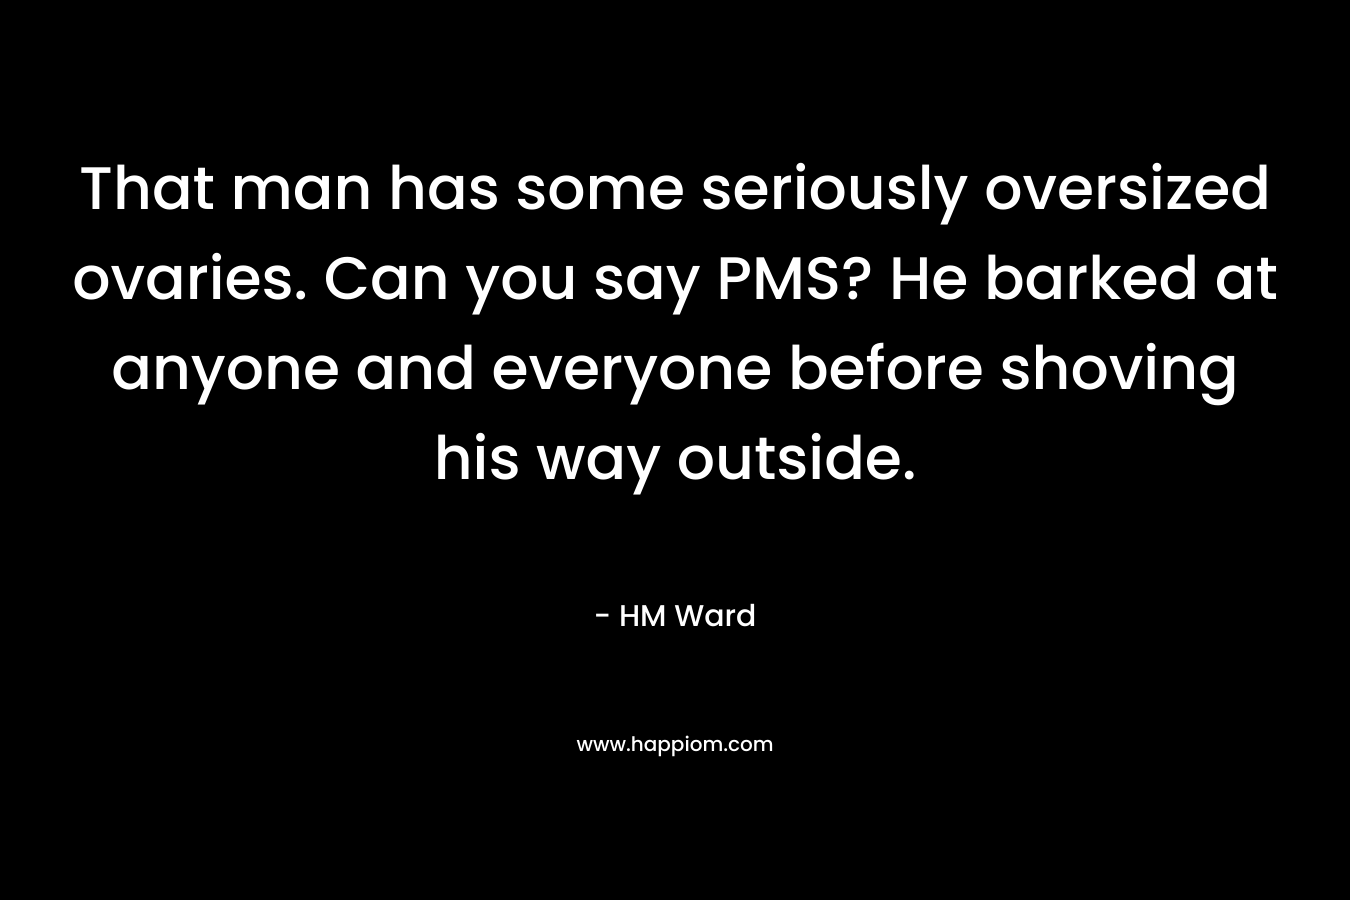 That man has some seriously oversized ovaries. Can you say PMS? He barked at anyone and everyone before shoving his way outside. – HM Ward